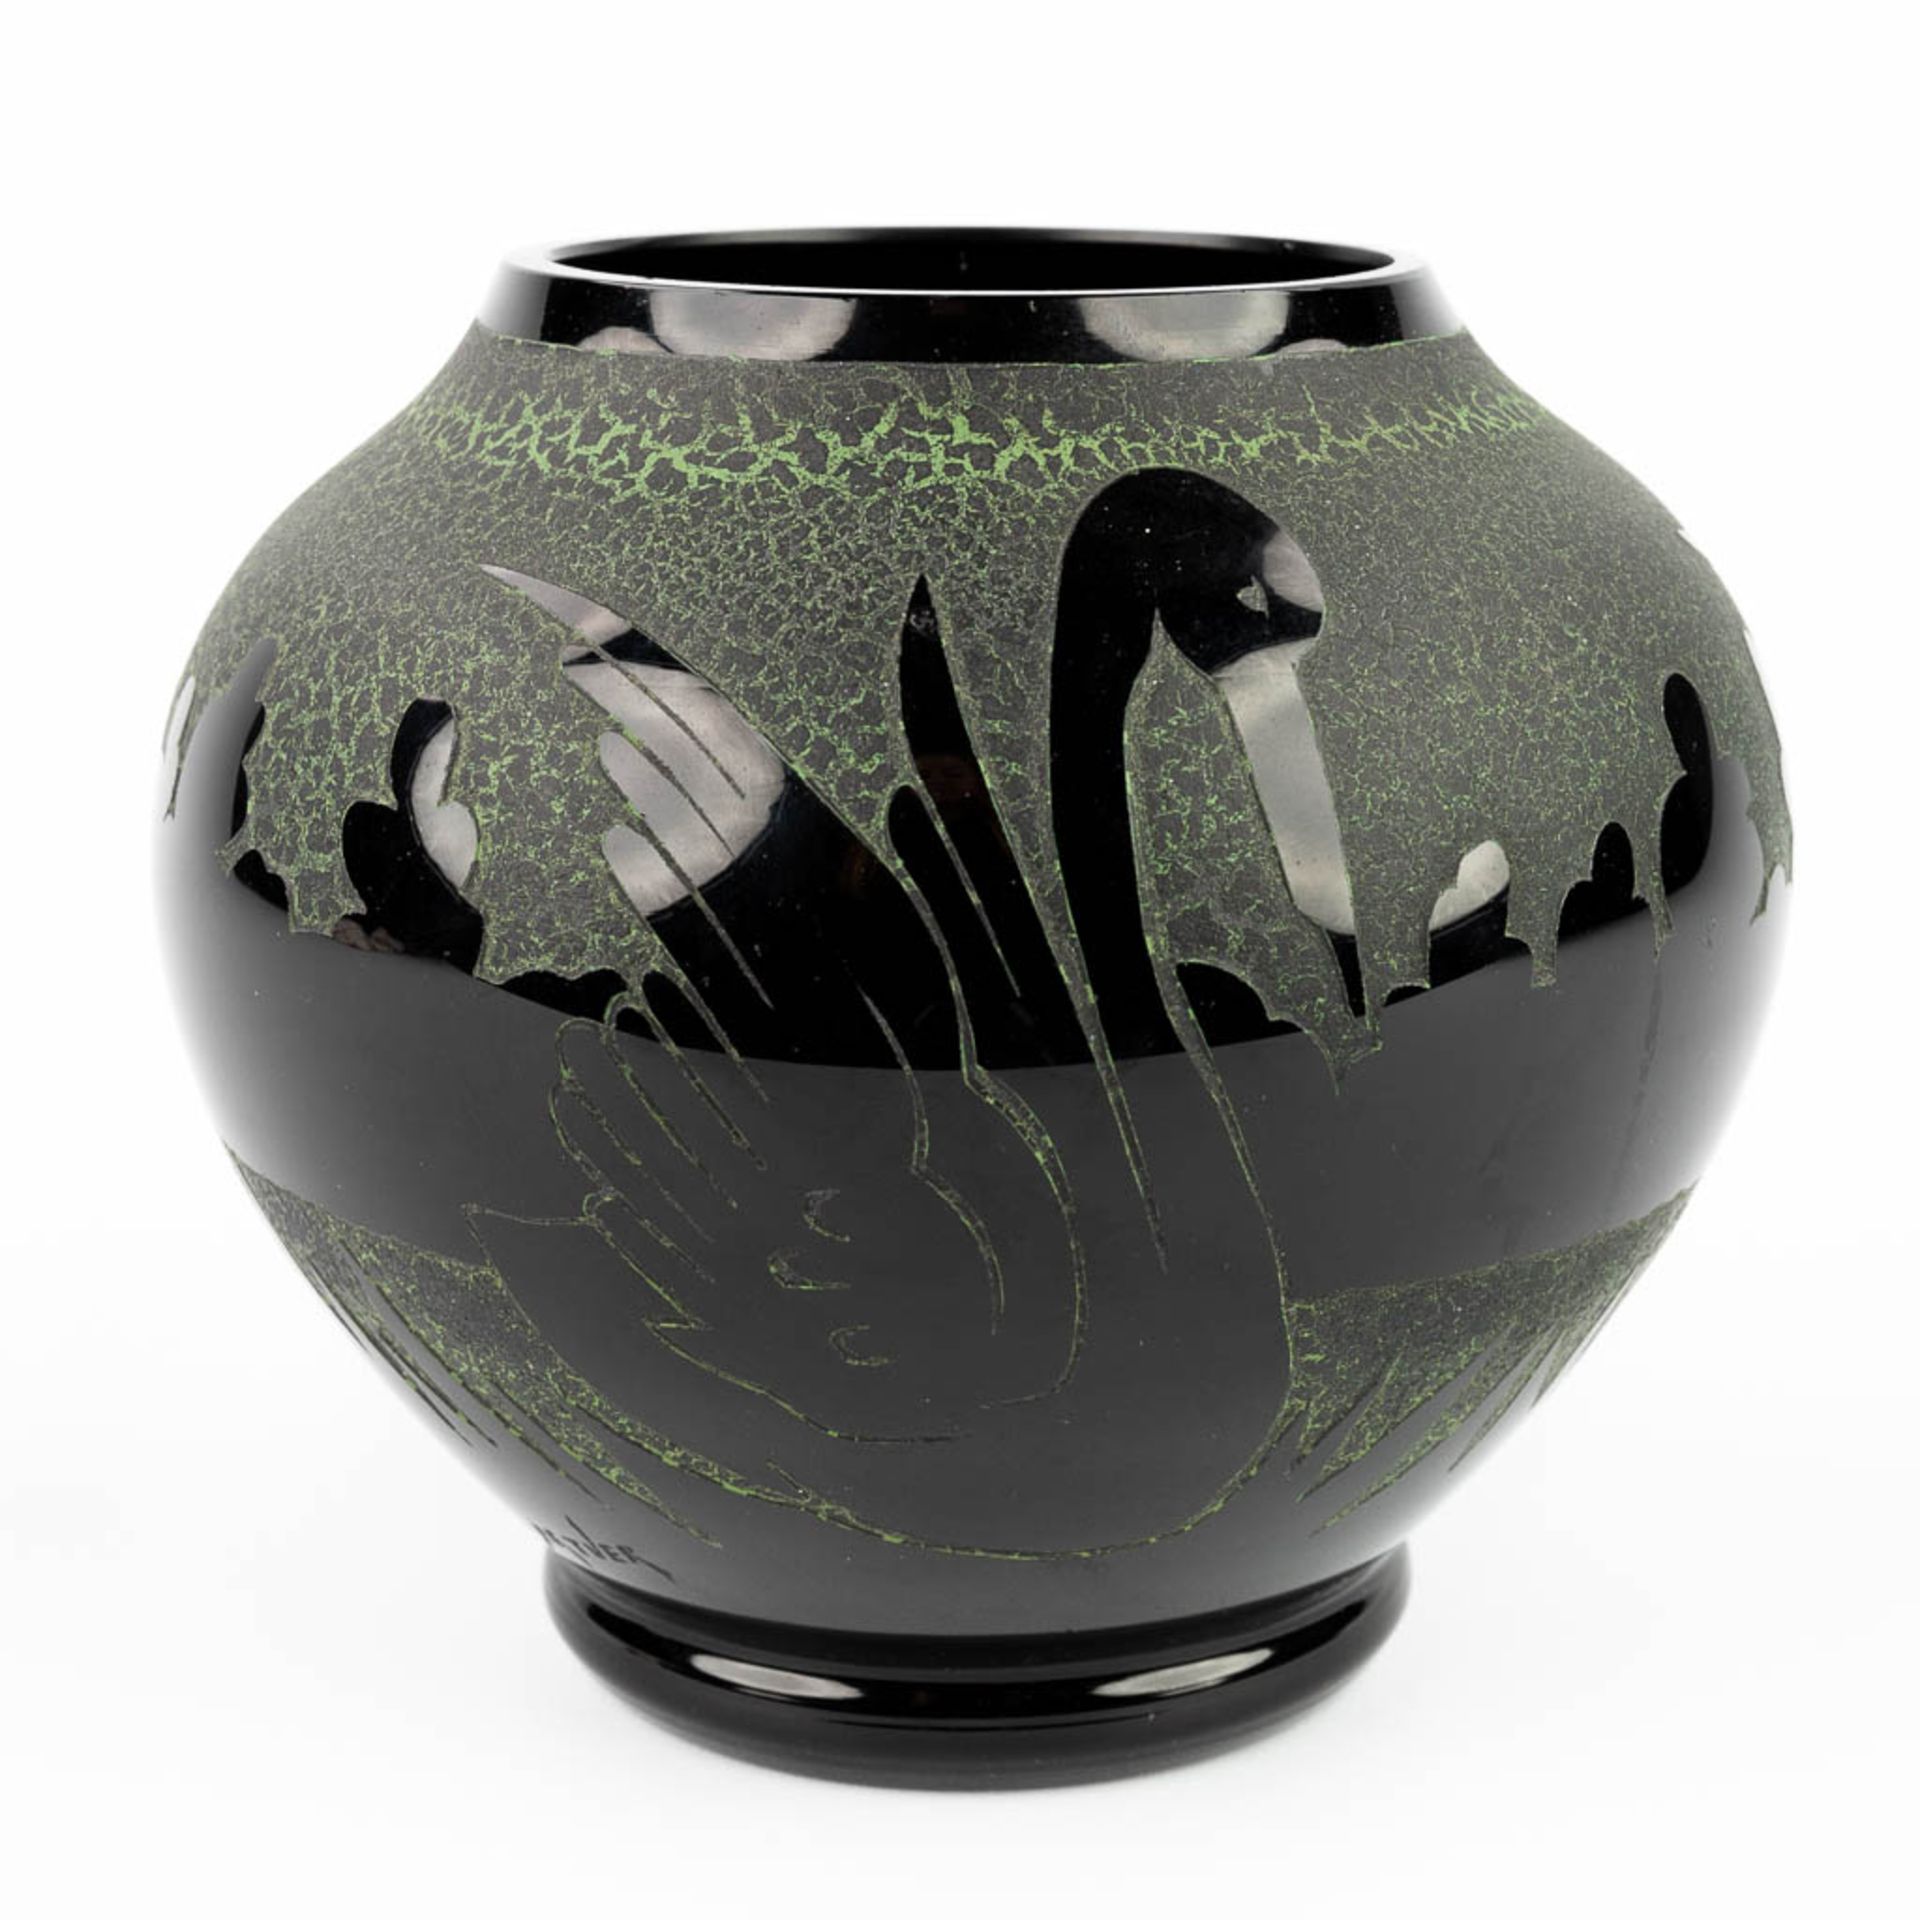 ARTVER Paul HELLER (XX), a vase 'Booms Glass' decorated with swans. (15,5 x 16cm) - Image 11 of 12